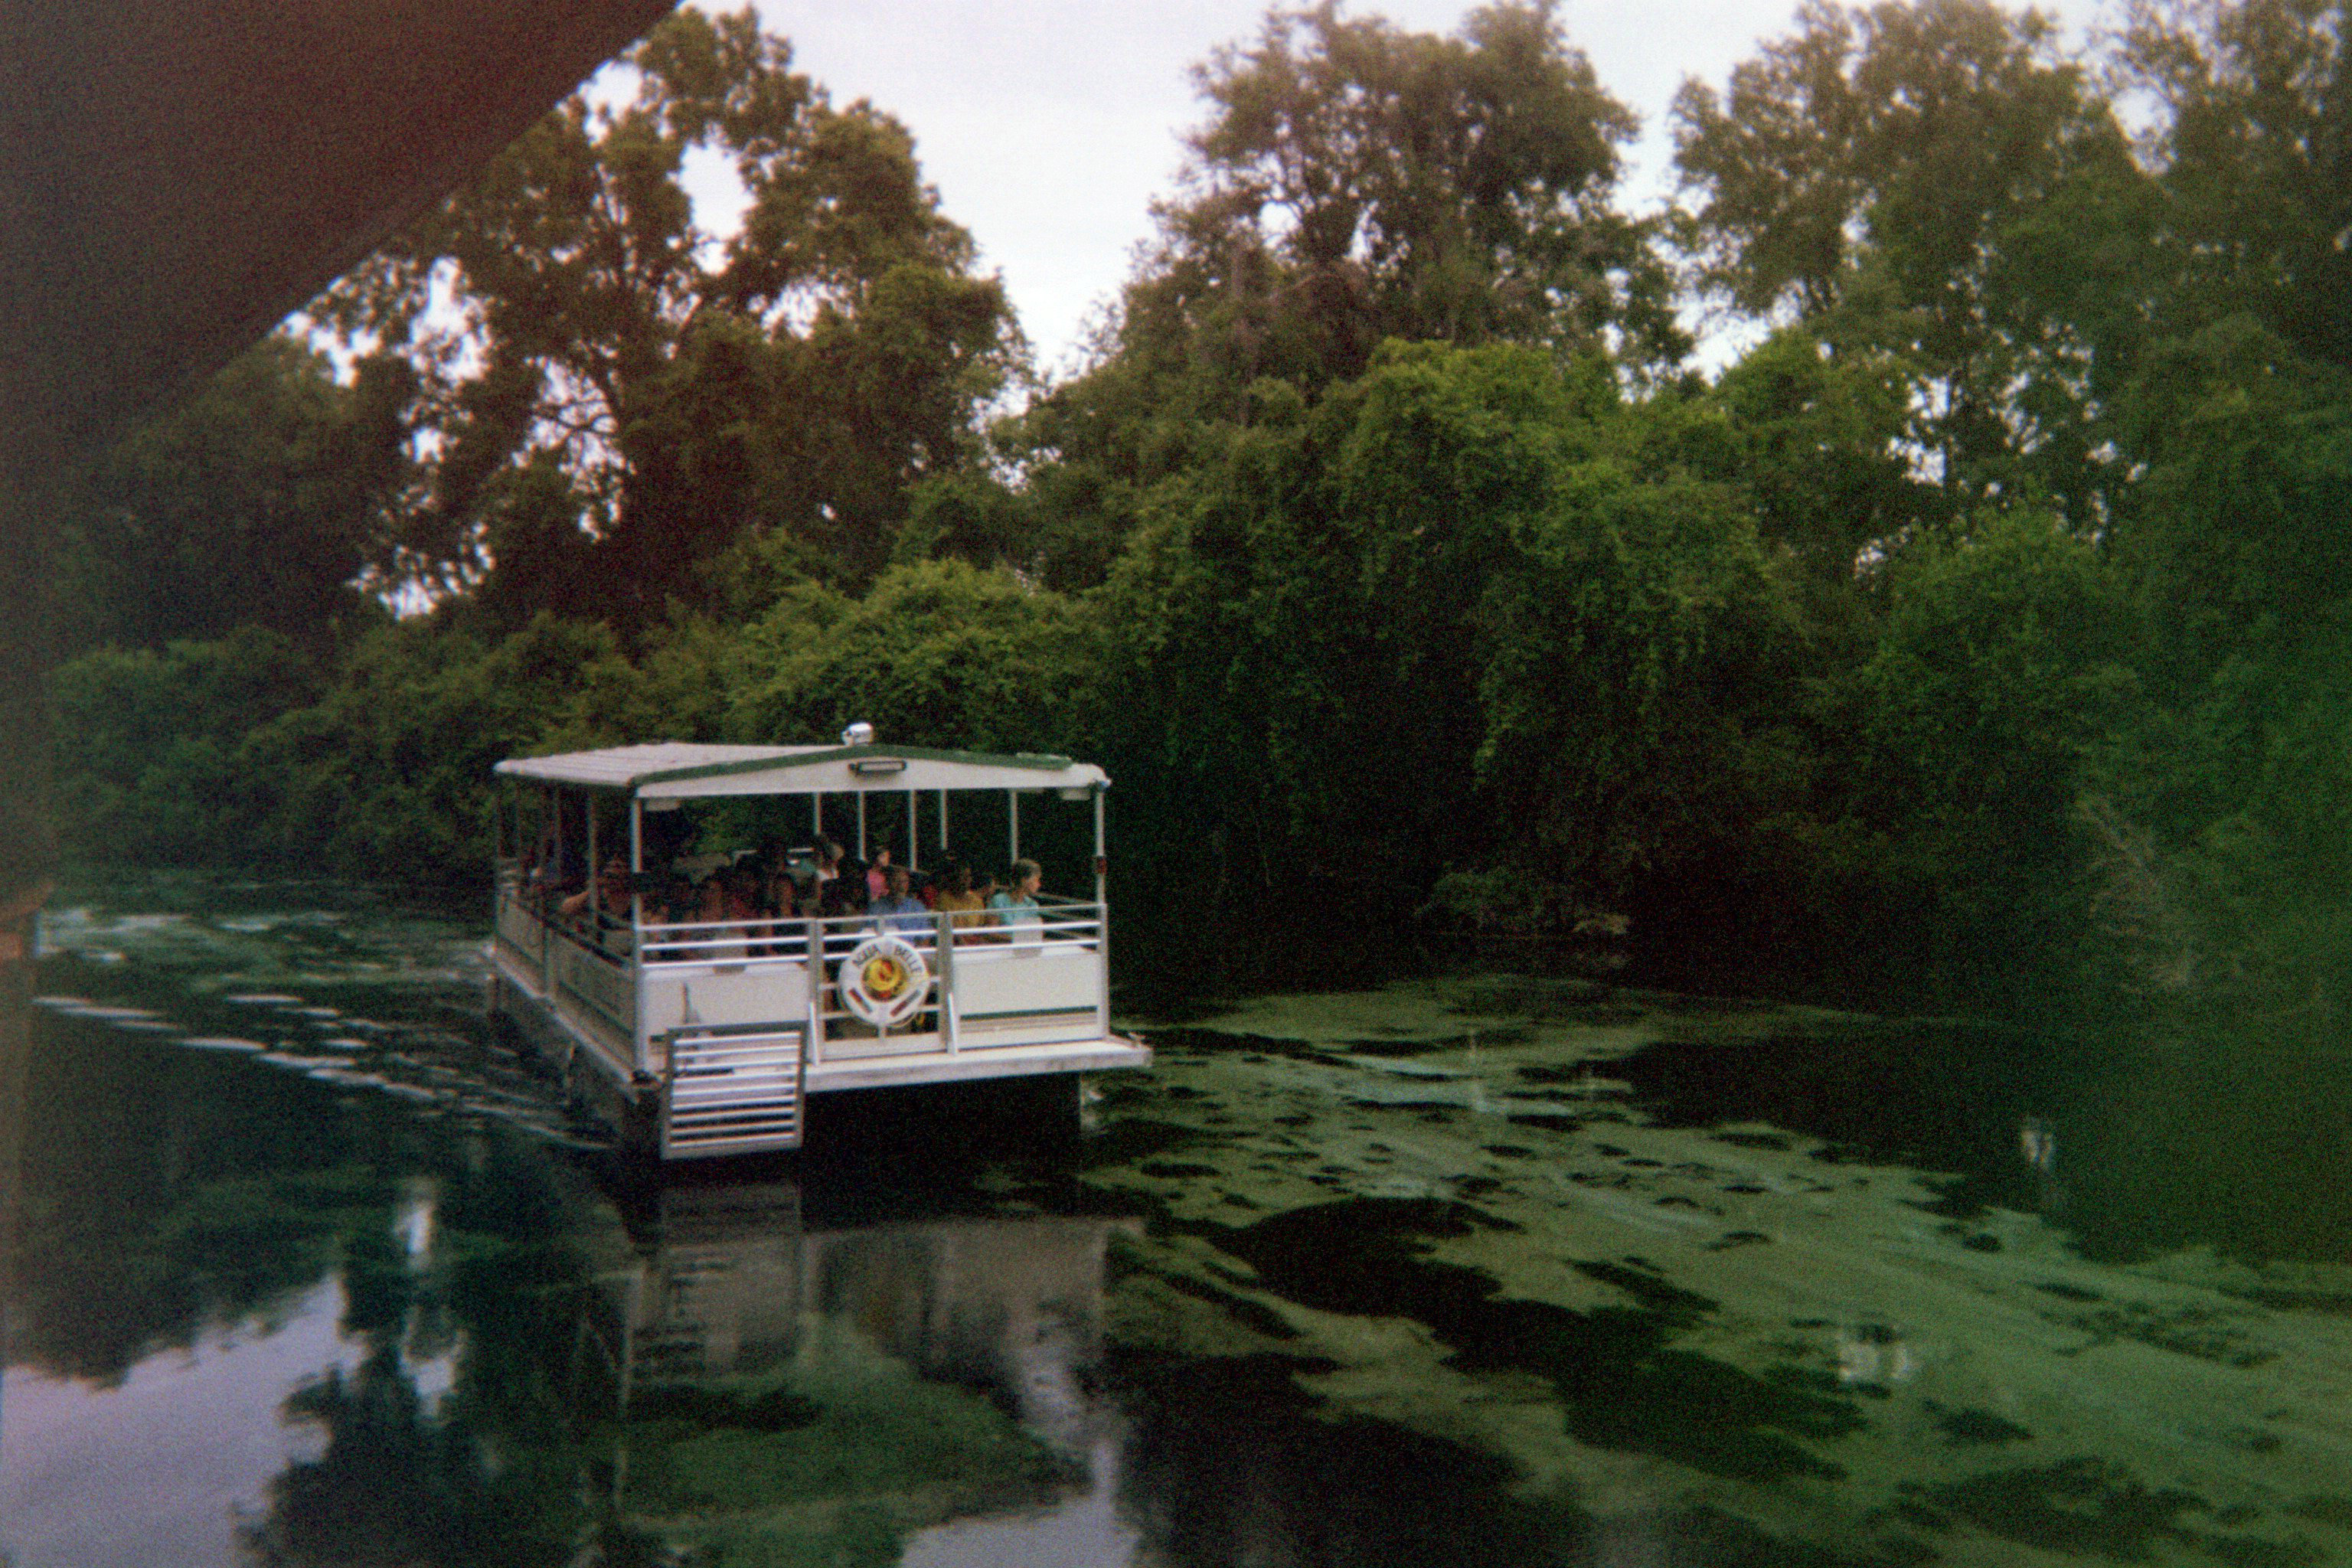 A tour boat on the Weeki Wachee River